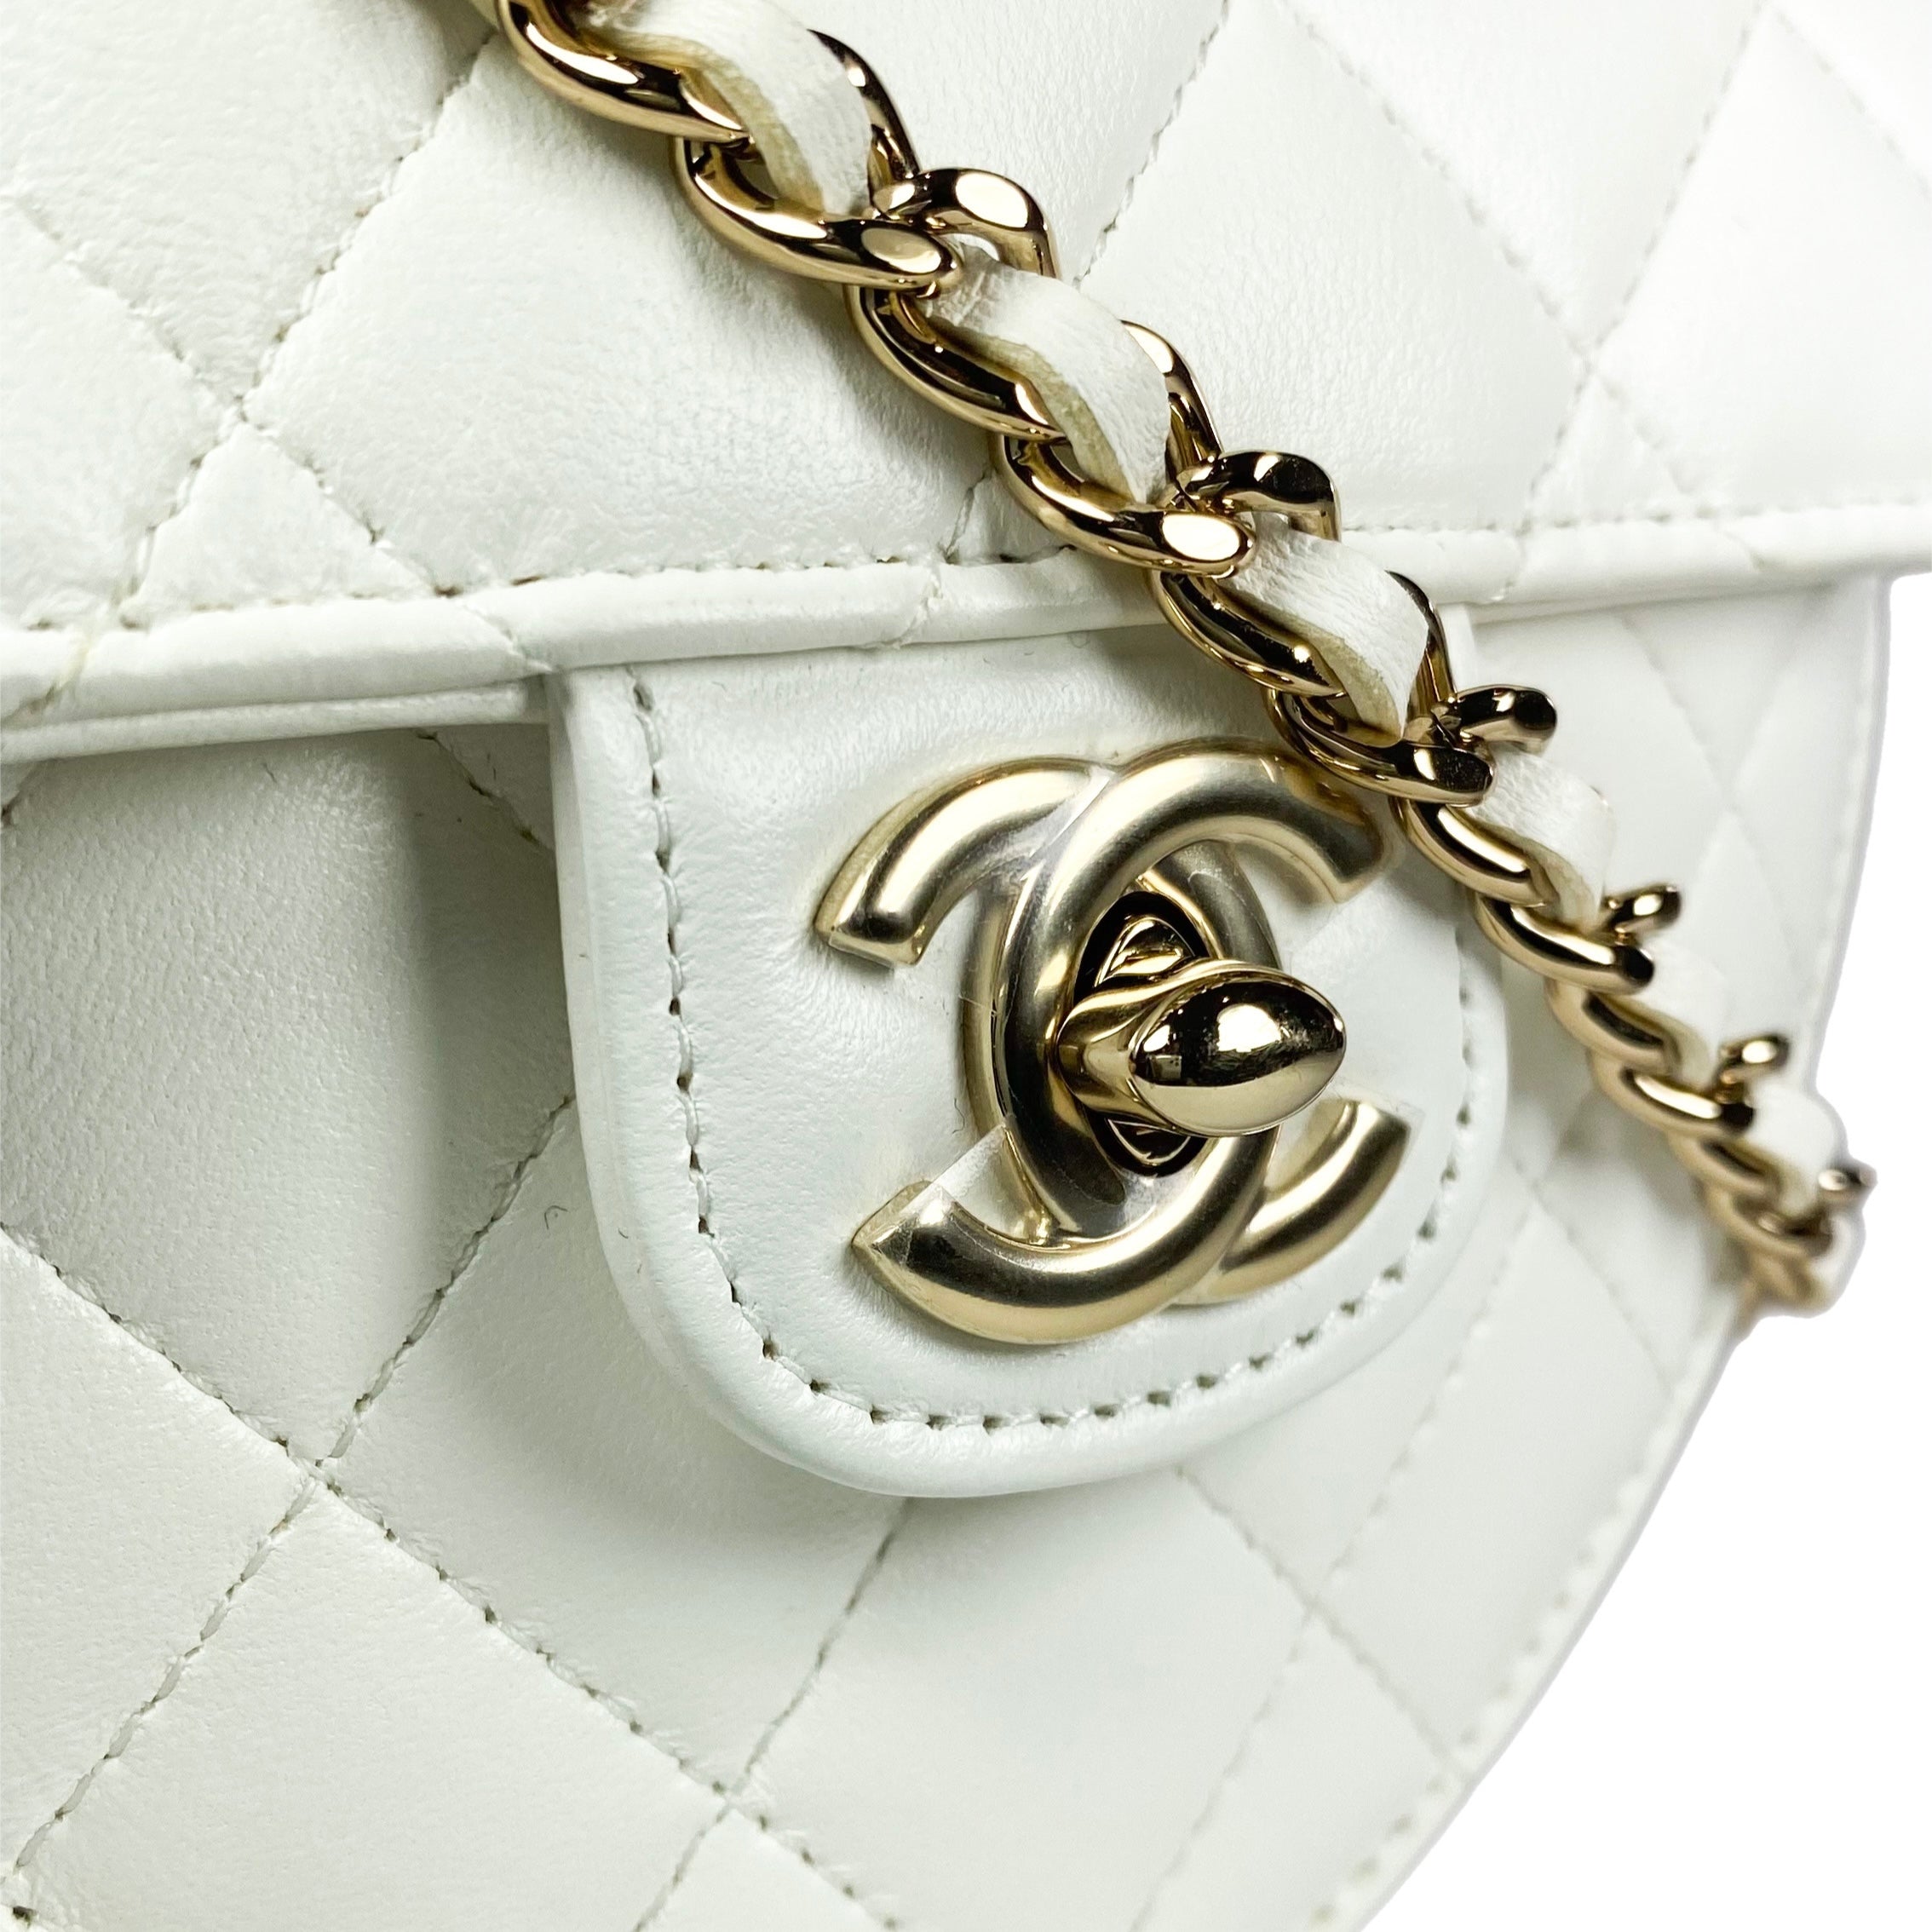 CHANEL Lambskin Quilted Chic Pearls Clutch With Chain White, FASHIONPHILE